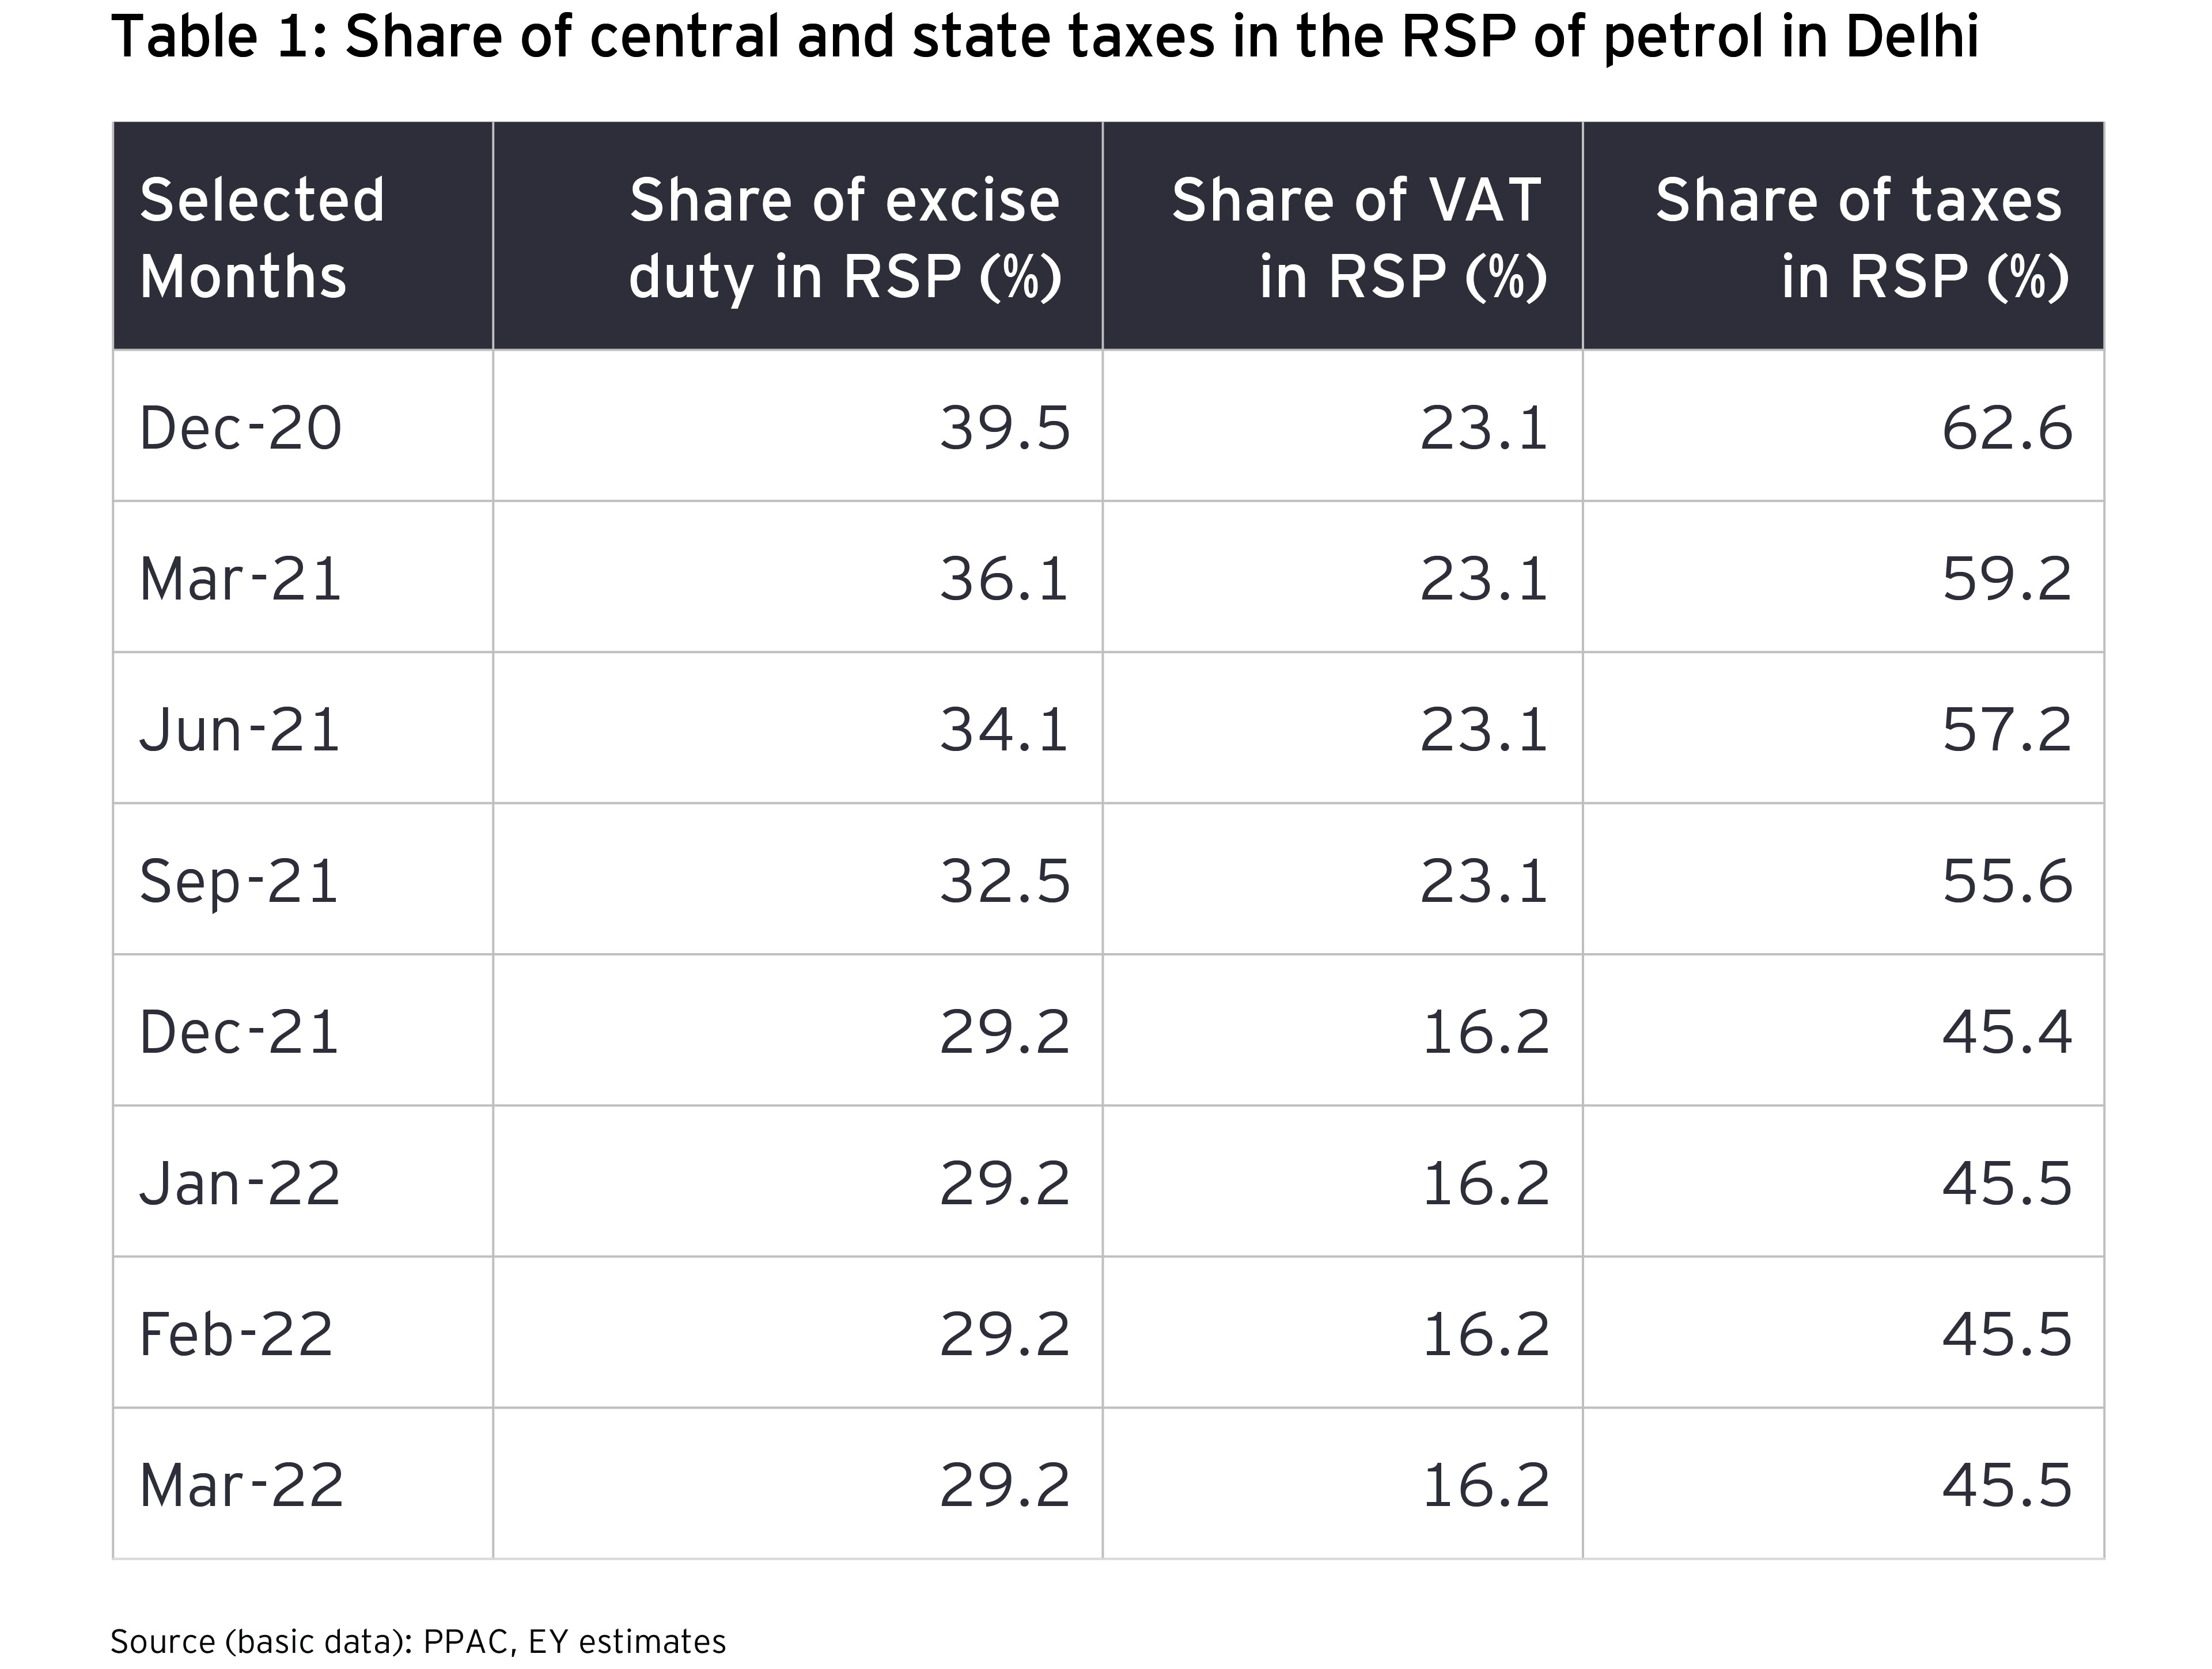 Share of central and state taxes in the RSP of petrol in Delhi